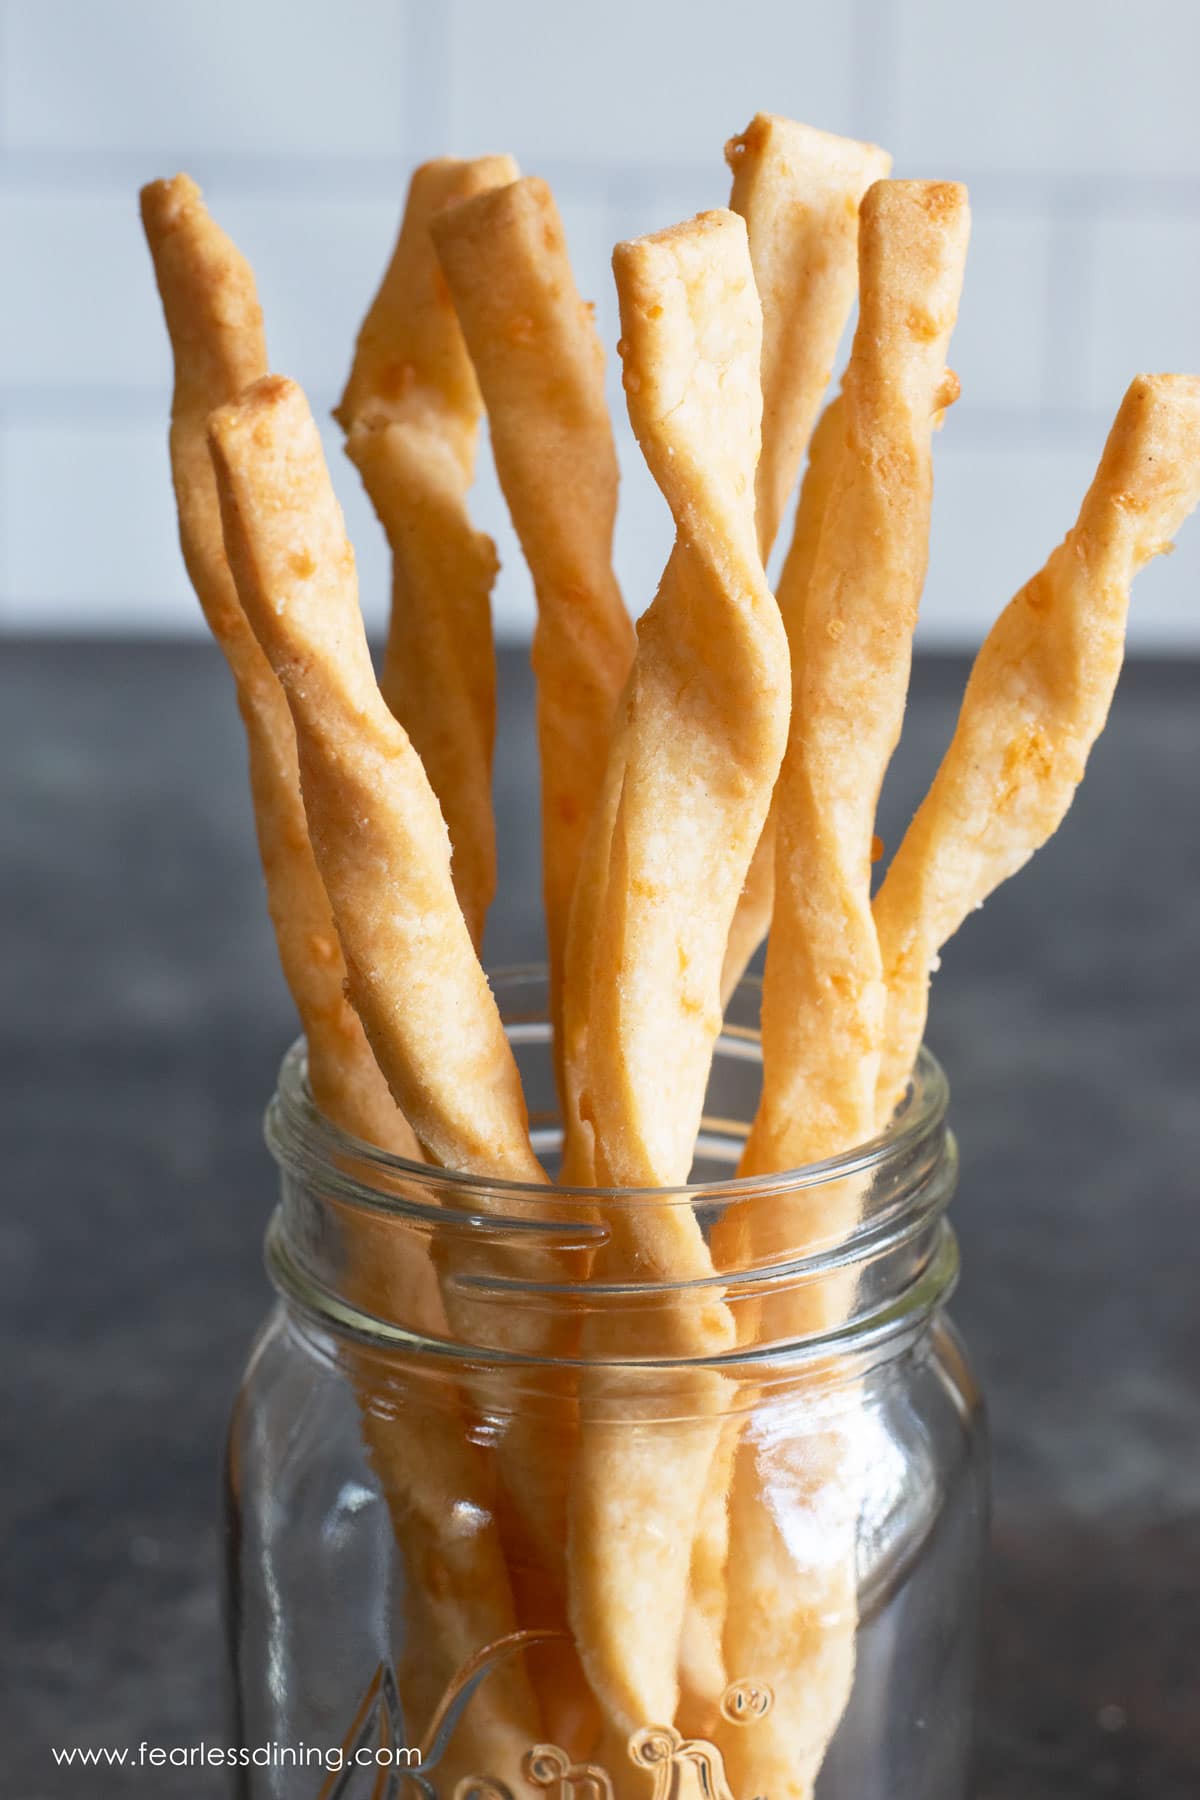 a close up view of the cheese straws